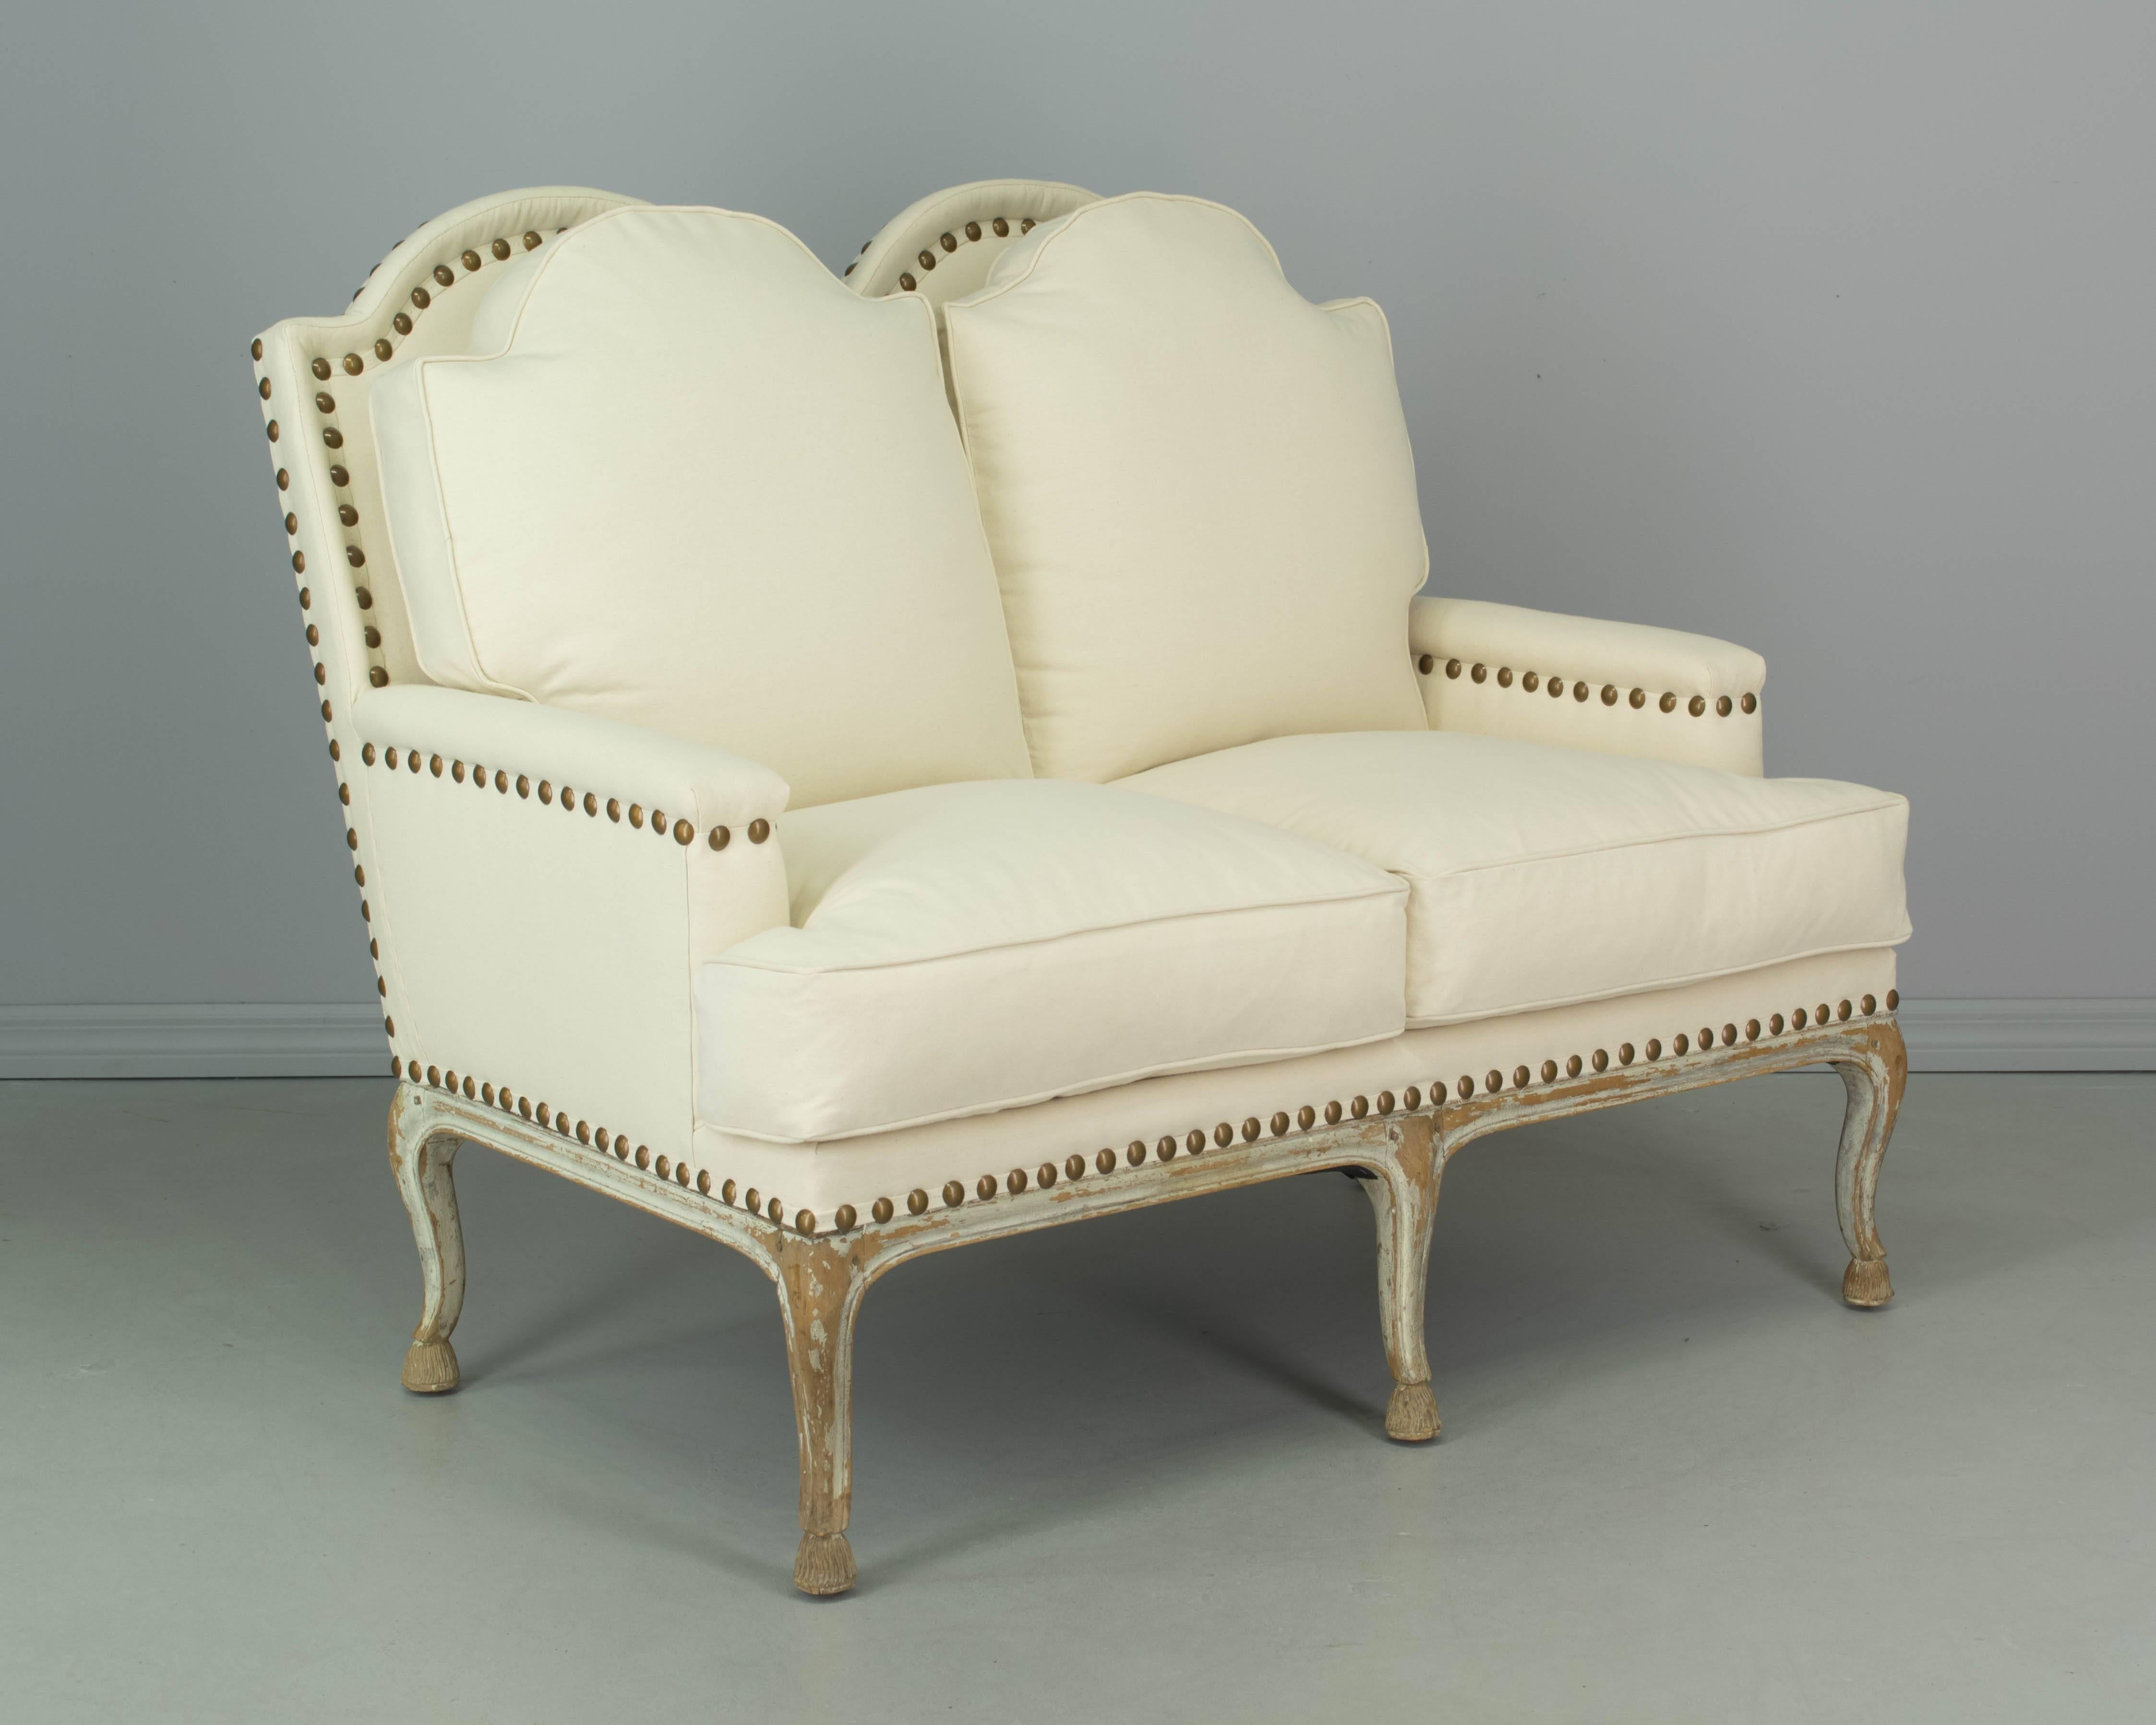 19th century French Louis XV style settee made of beechwood with pegged construction. Sturdy five-leg frame with some of the original paint remaining. Reupholstered in neutral cotton canvas fabric with decorative brass nailhead trim. Wrapped down